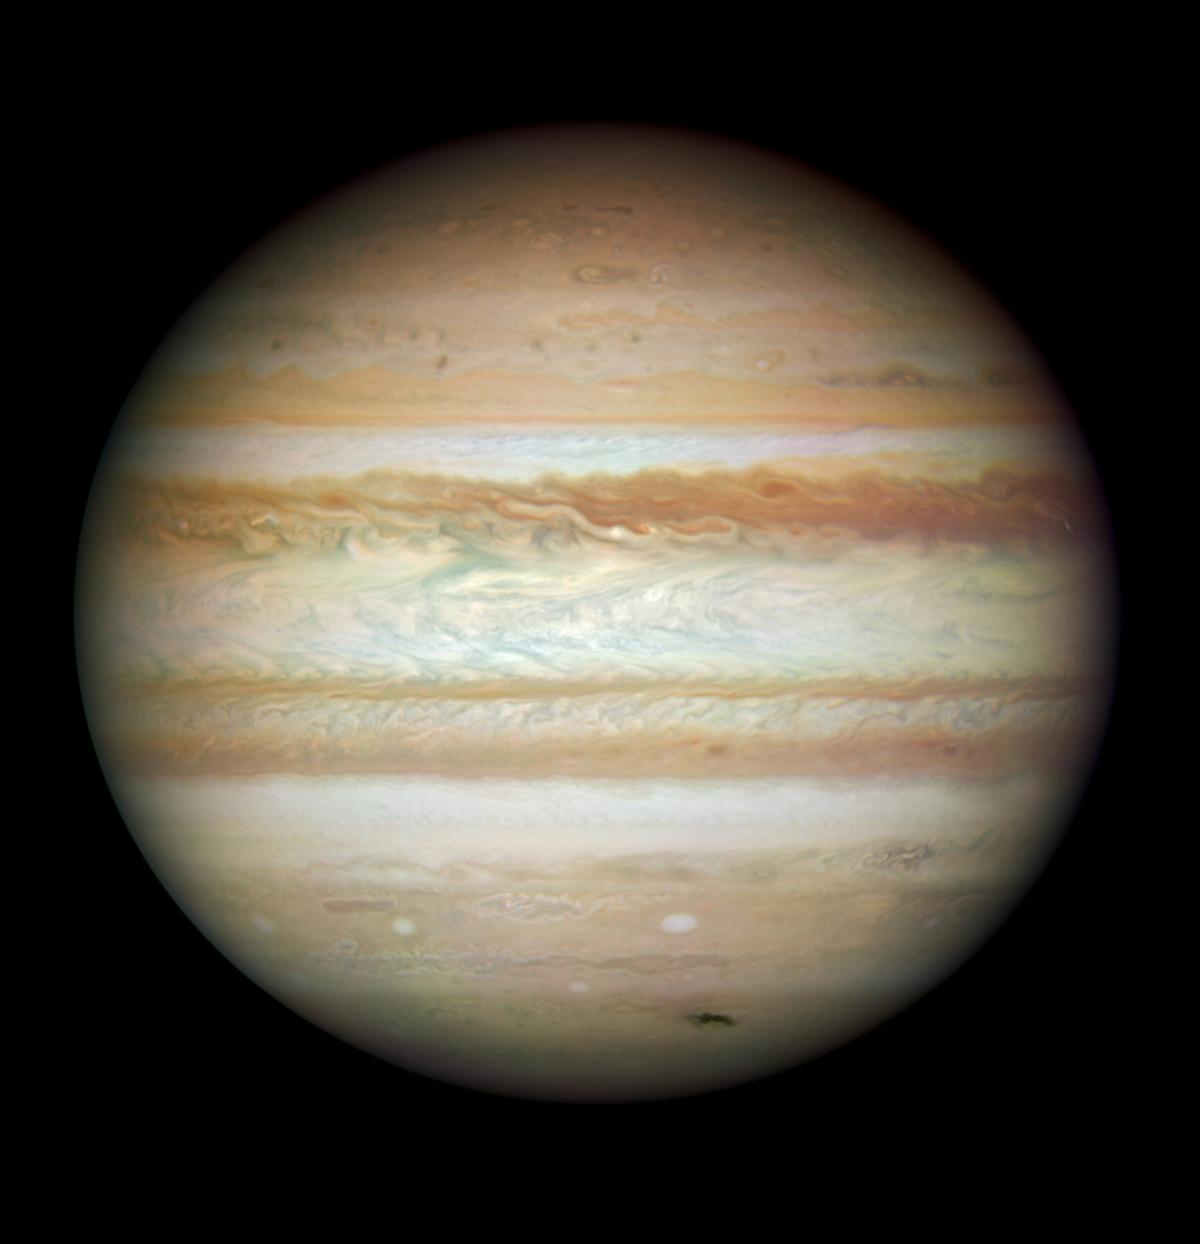 In this image provided by NASA, ESA, and the Hubble SM4 ERO Team, the planet Jupiter is pictured July 23, 2009, in space. (NASA, ESA, and the Hubble SM4 ERO Team via Getty Images)